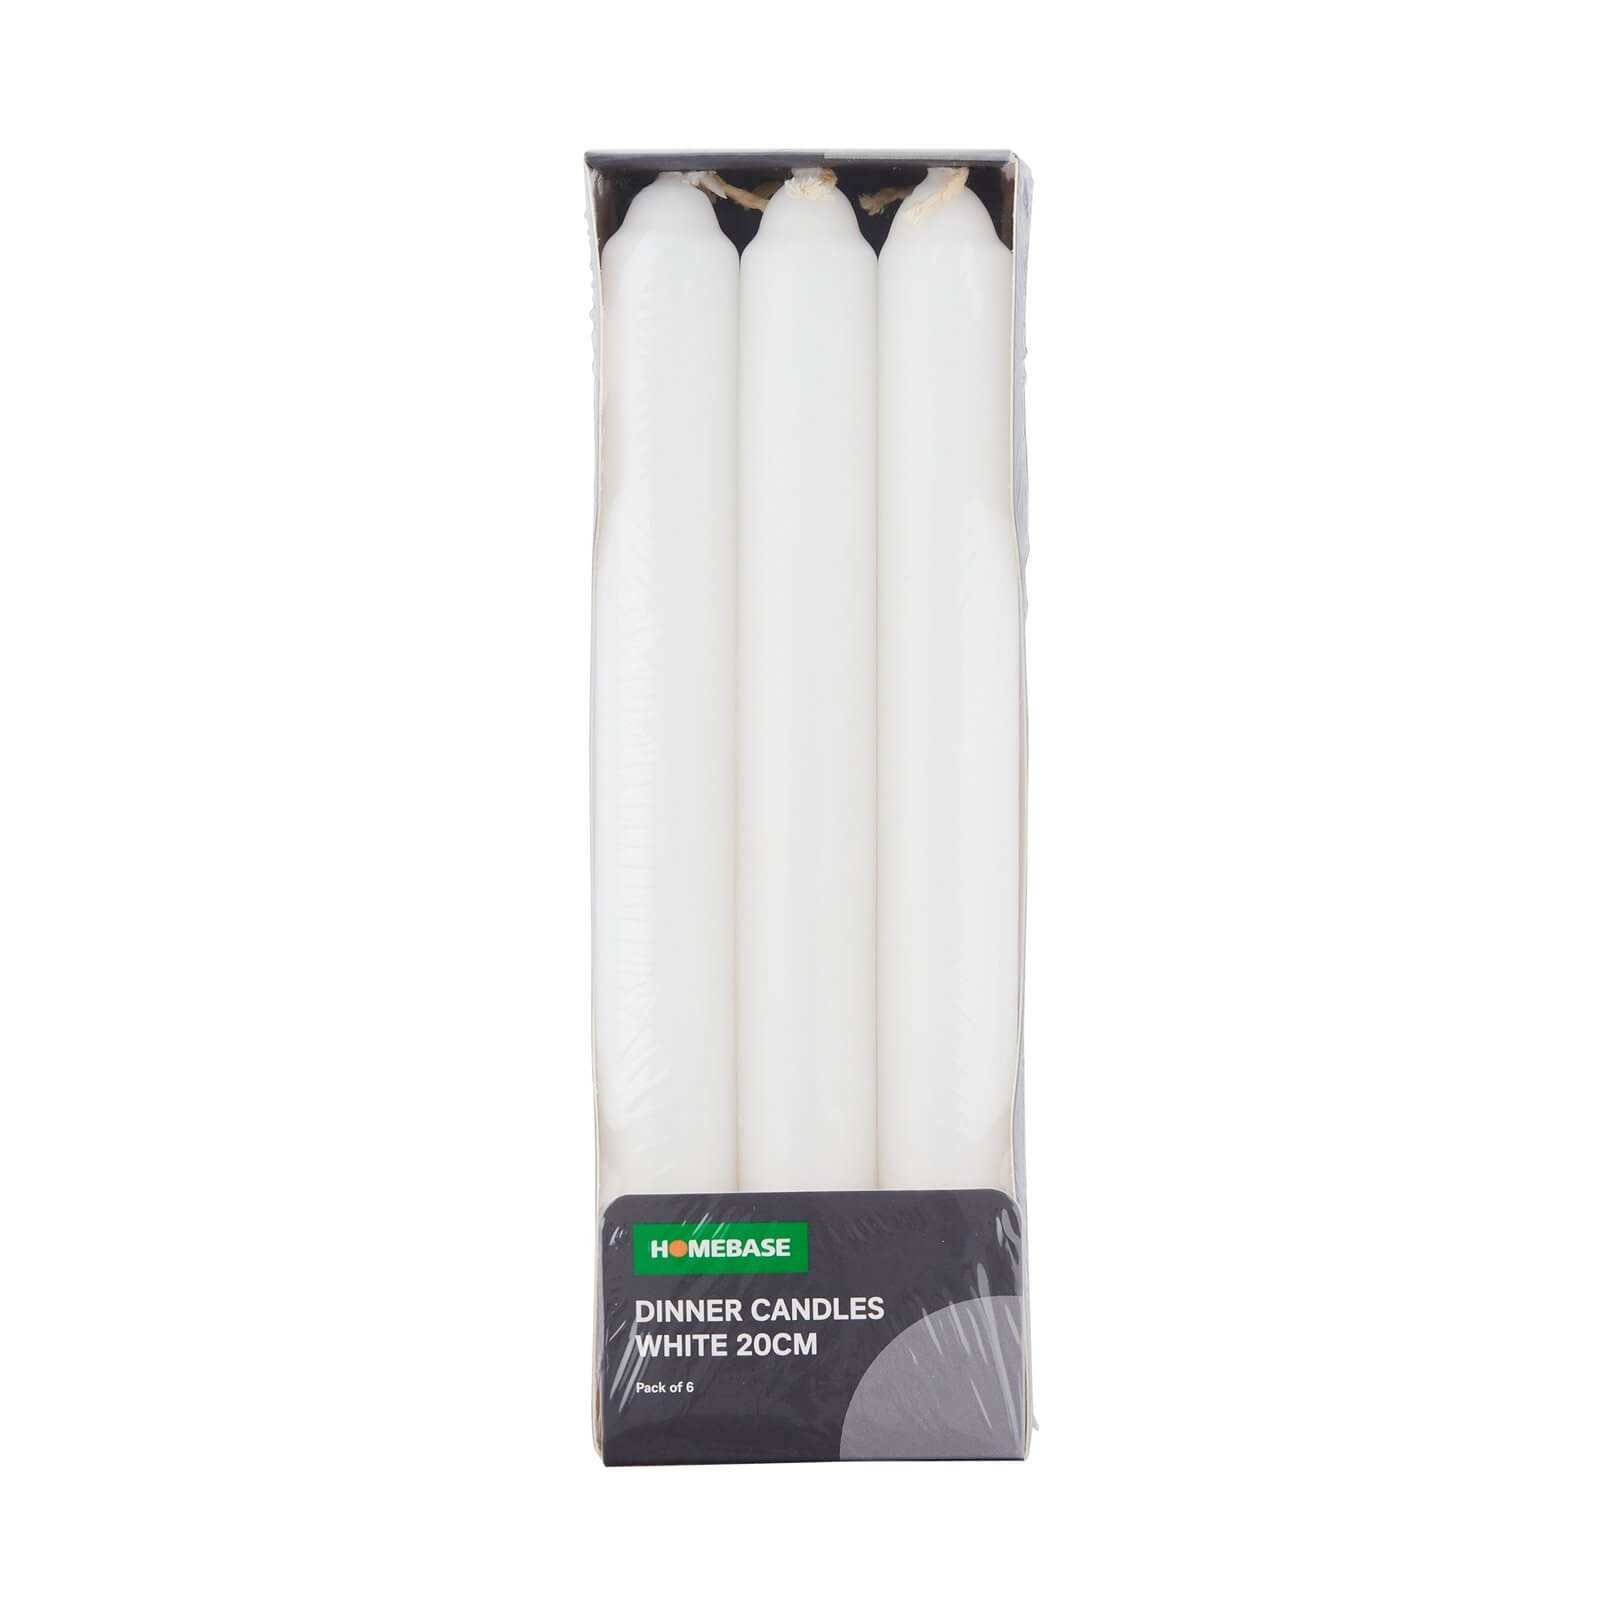 Photo of Pack Of 6 Dinner Candles - White - 20cm